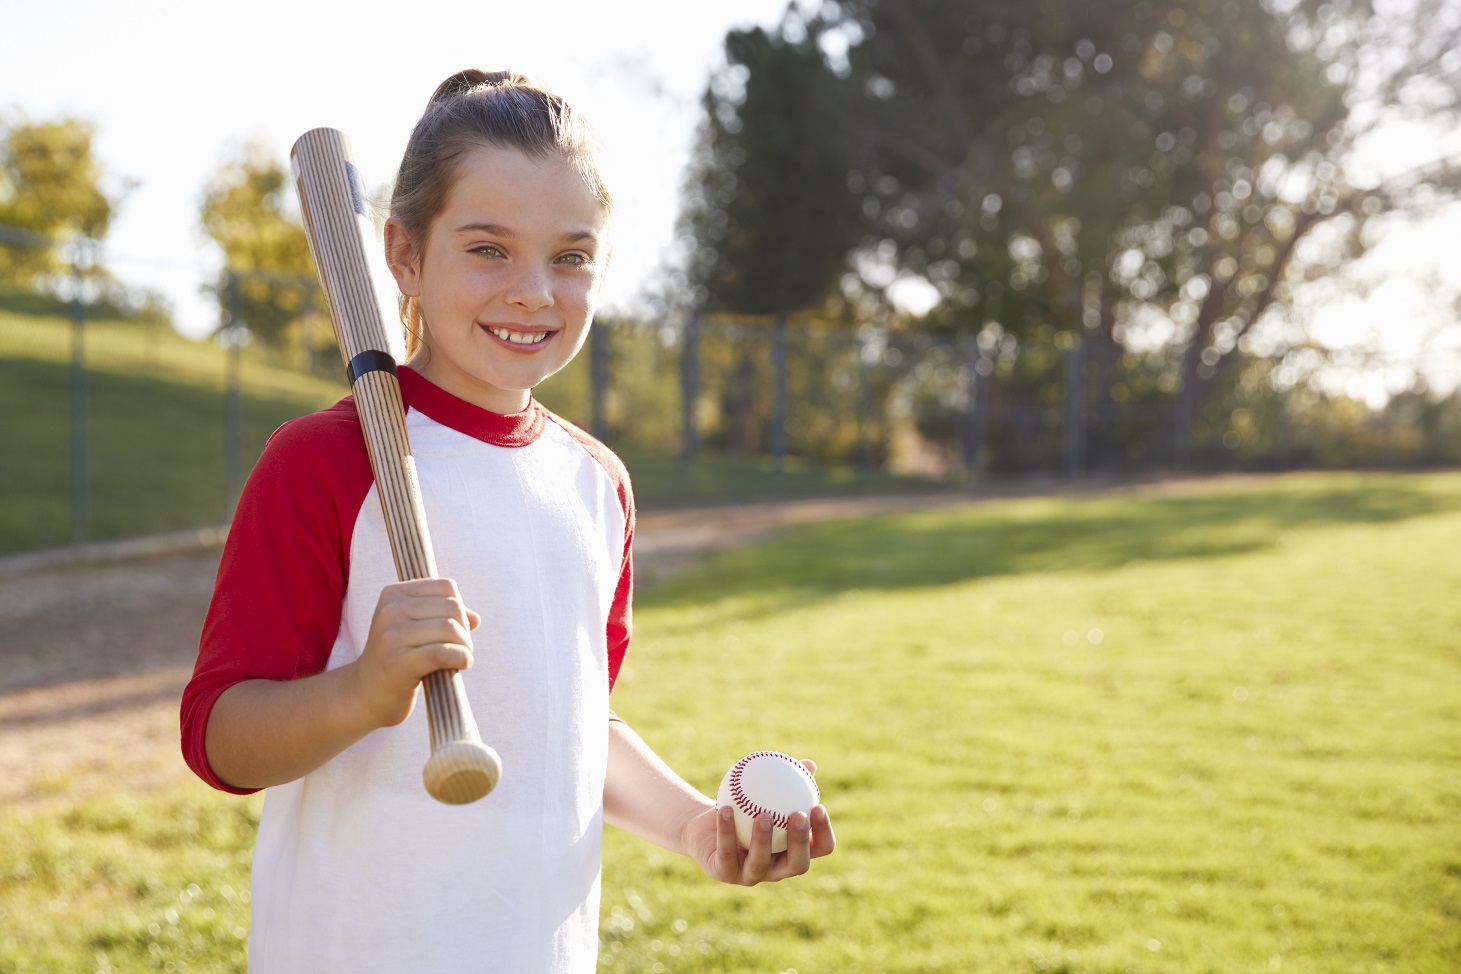 How to Get Your Child Started in Baseball